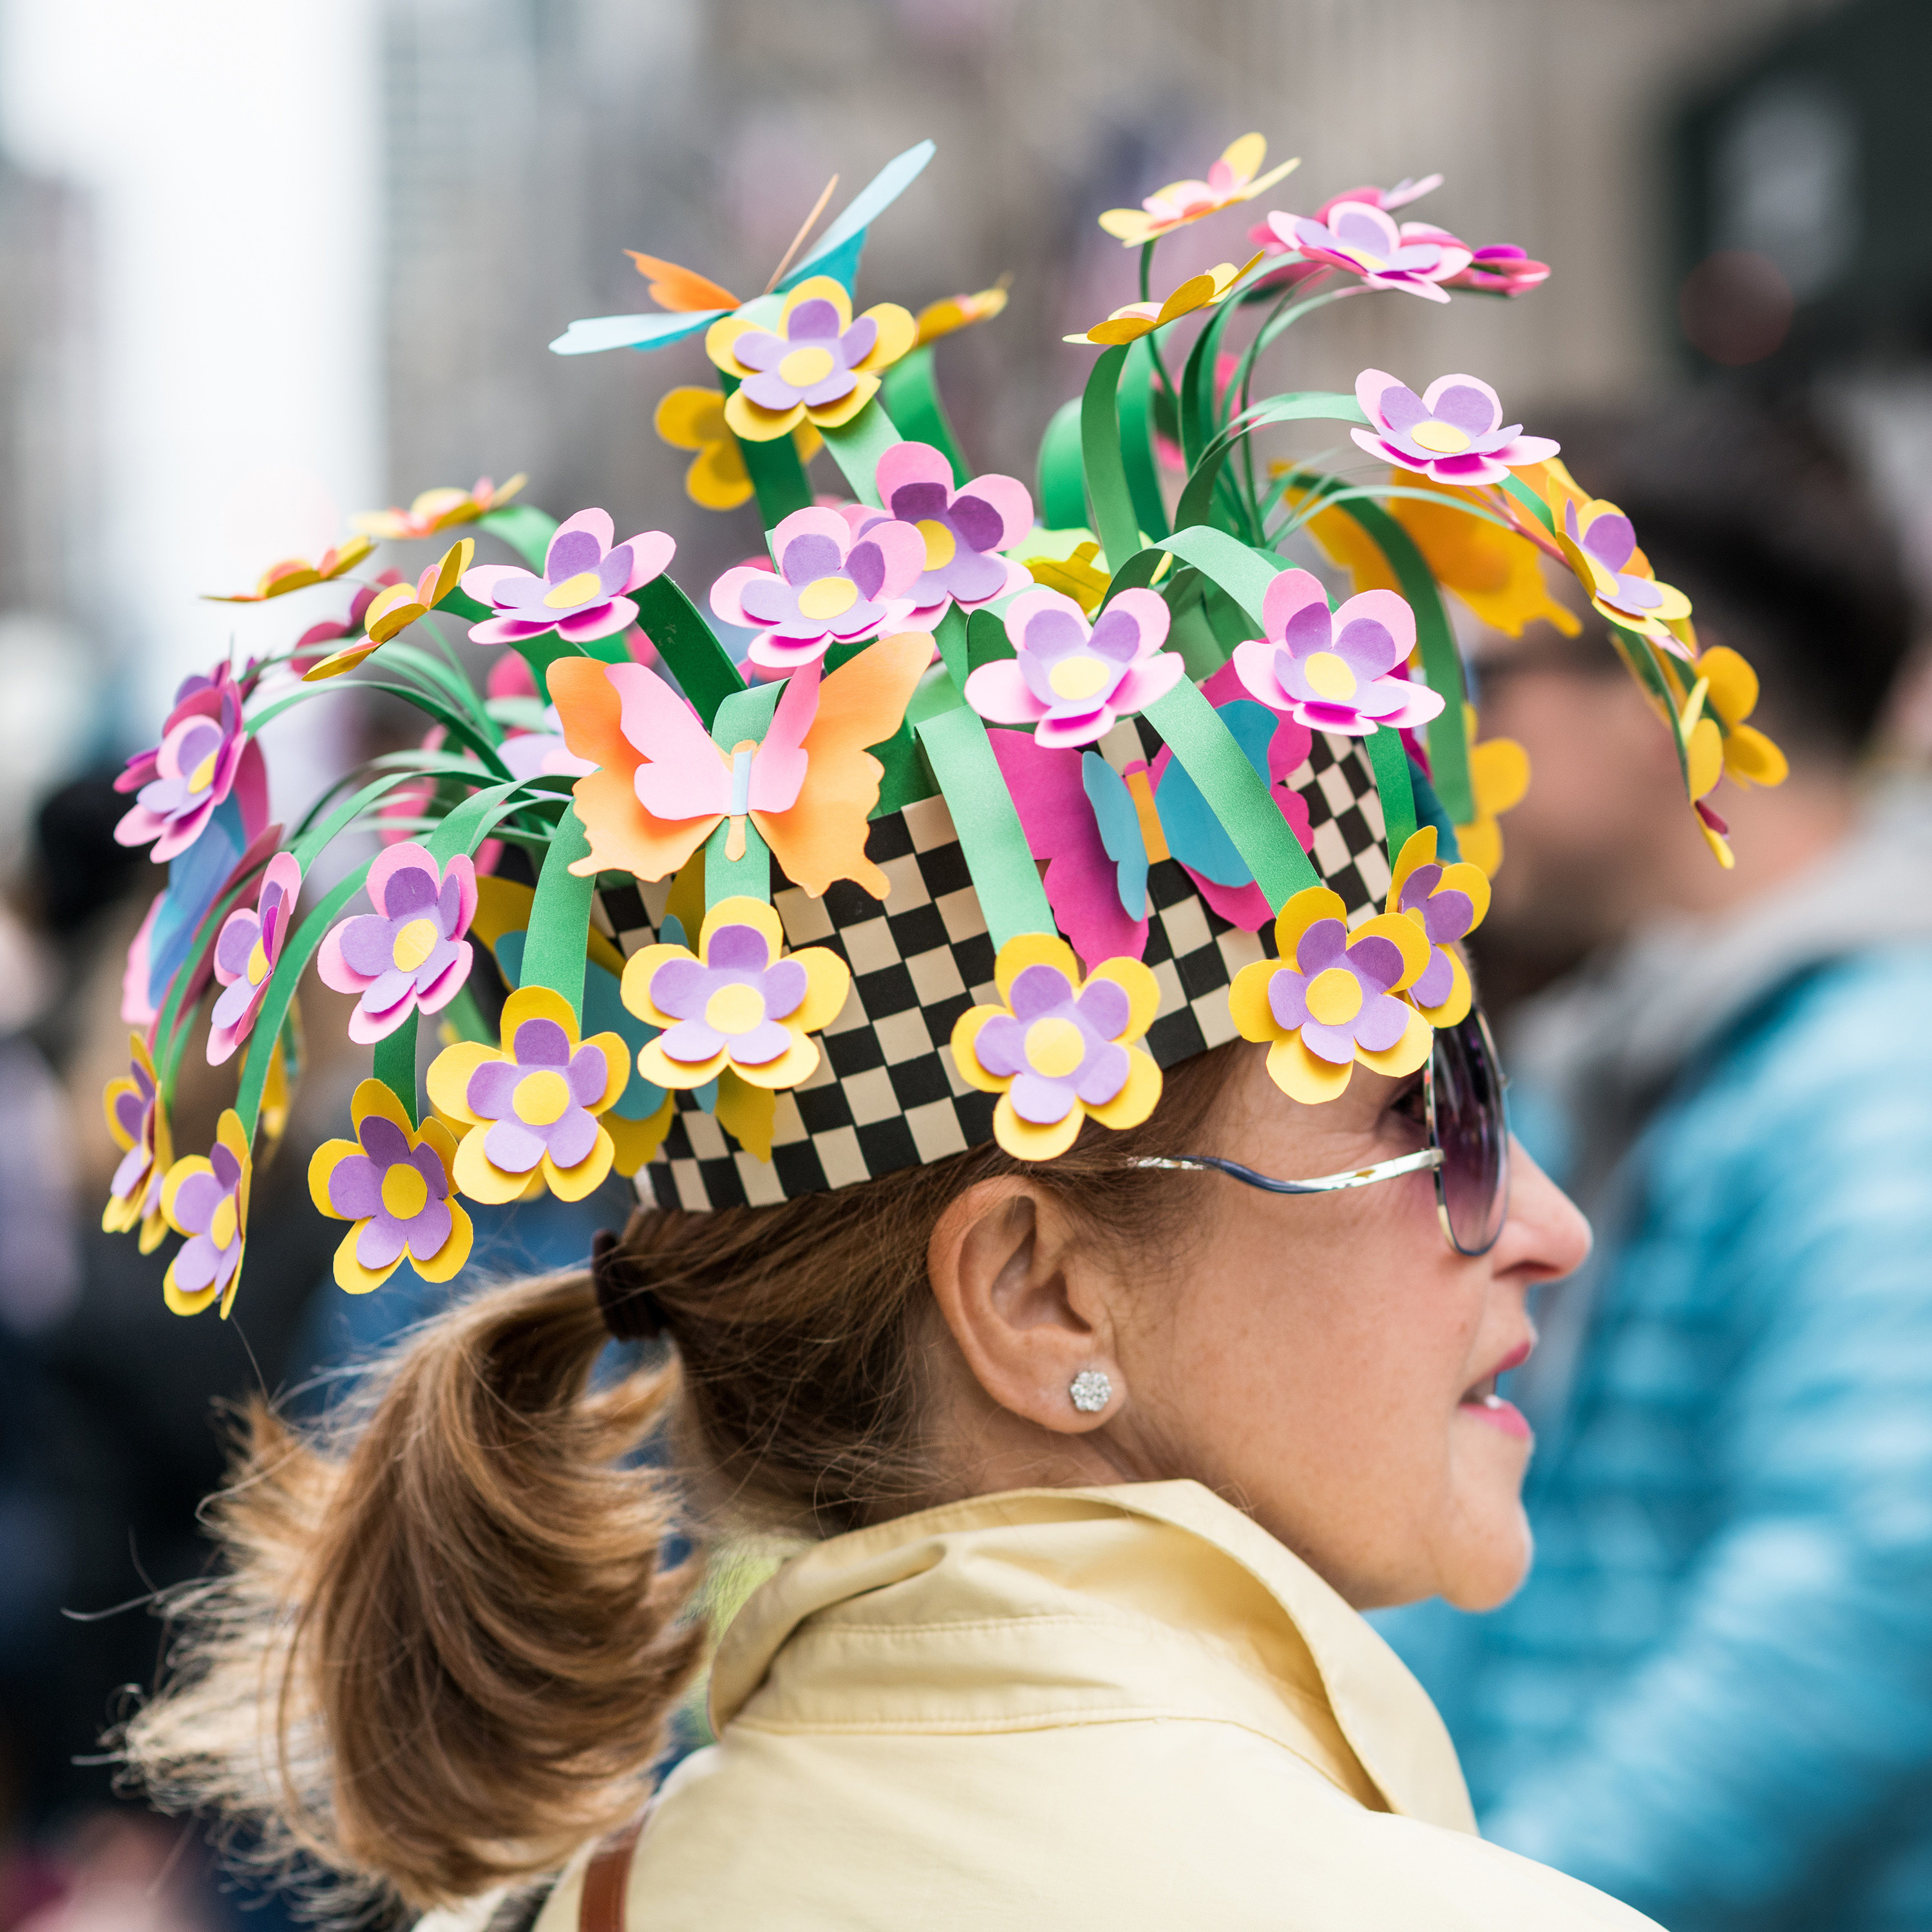 Close-up of colorful hat decorated with paper flowers worn by a woman